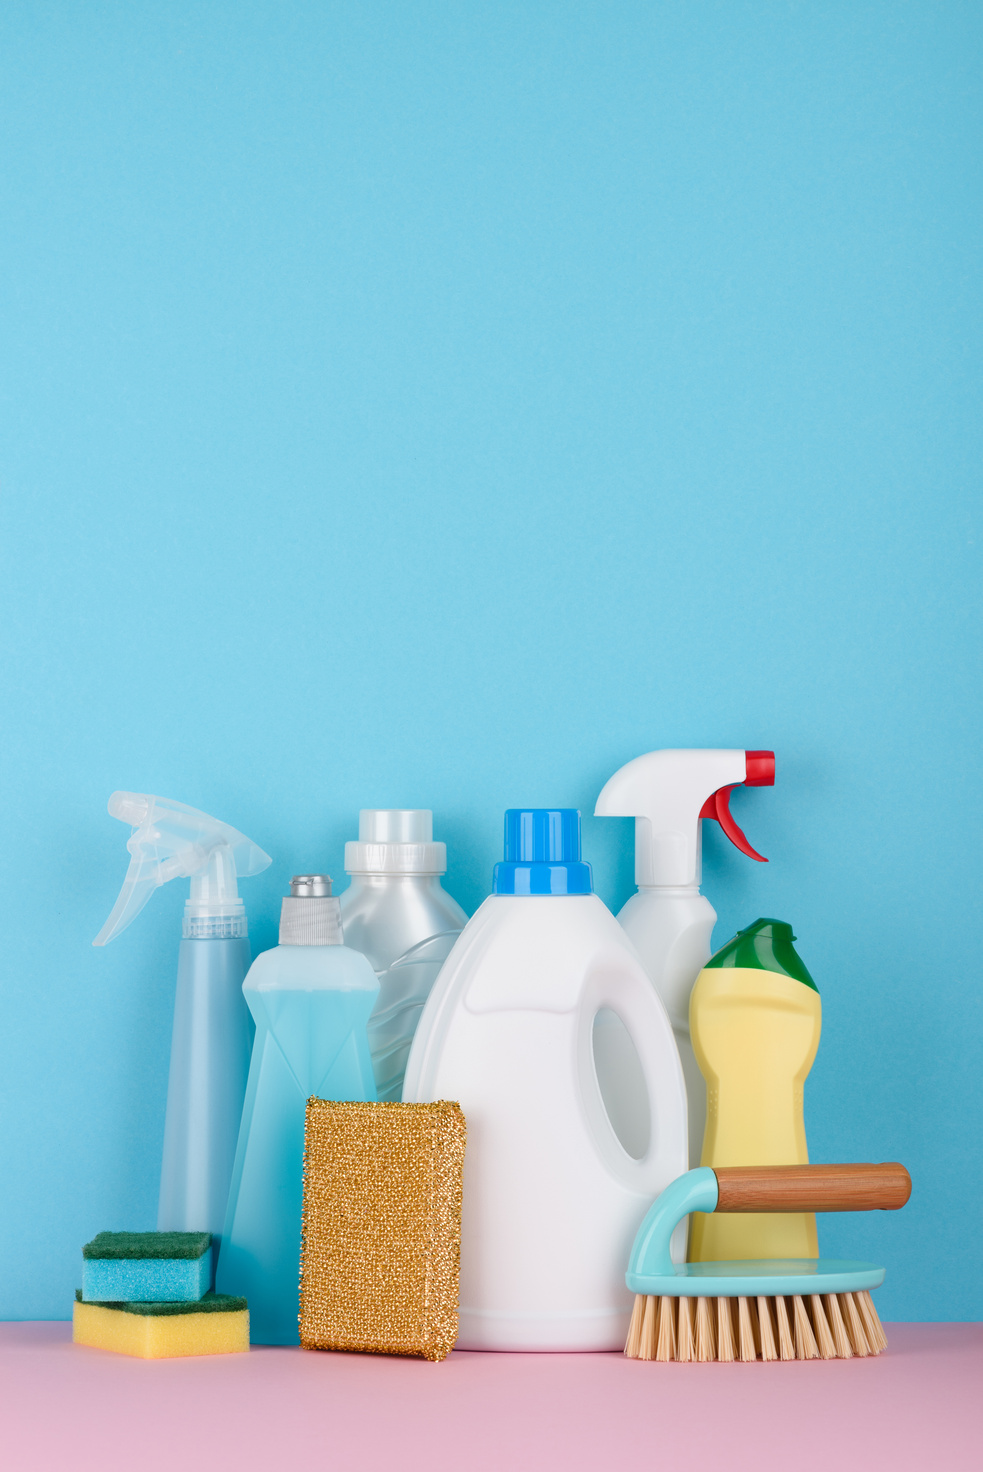 Clean service products assortment.